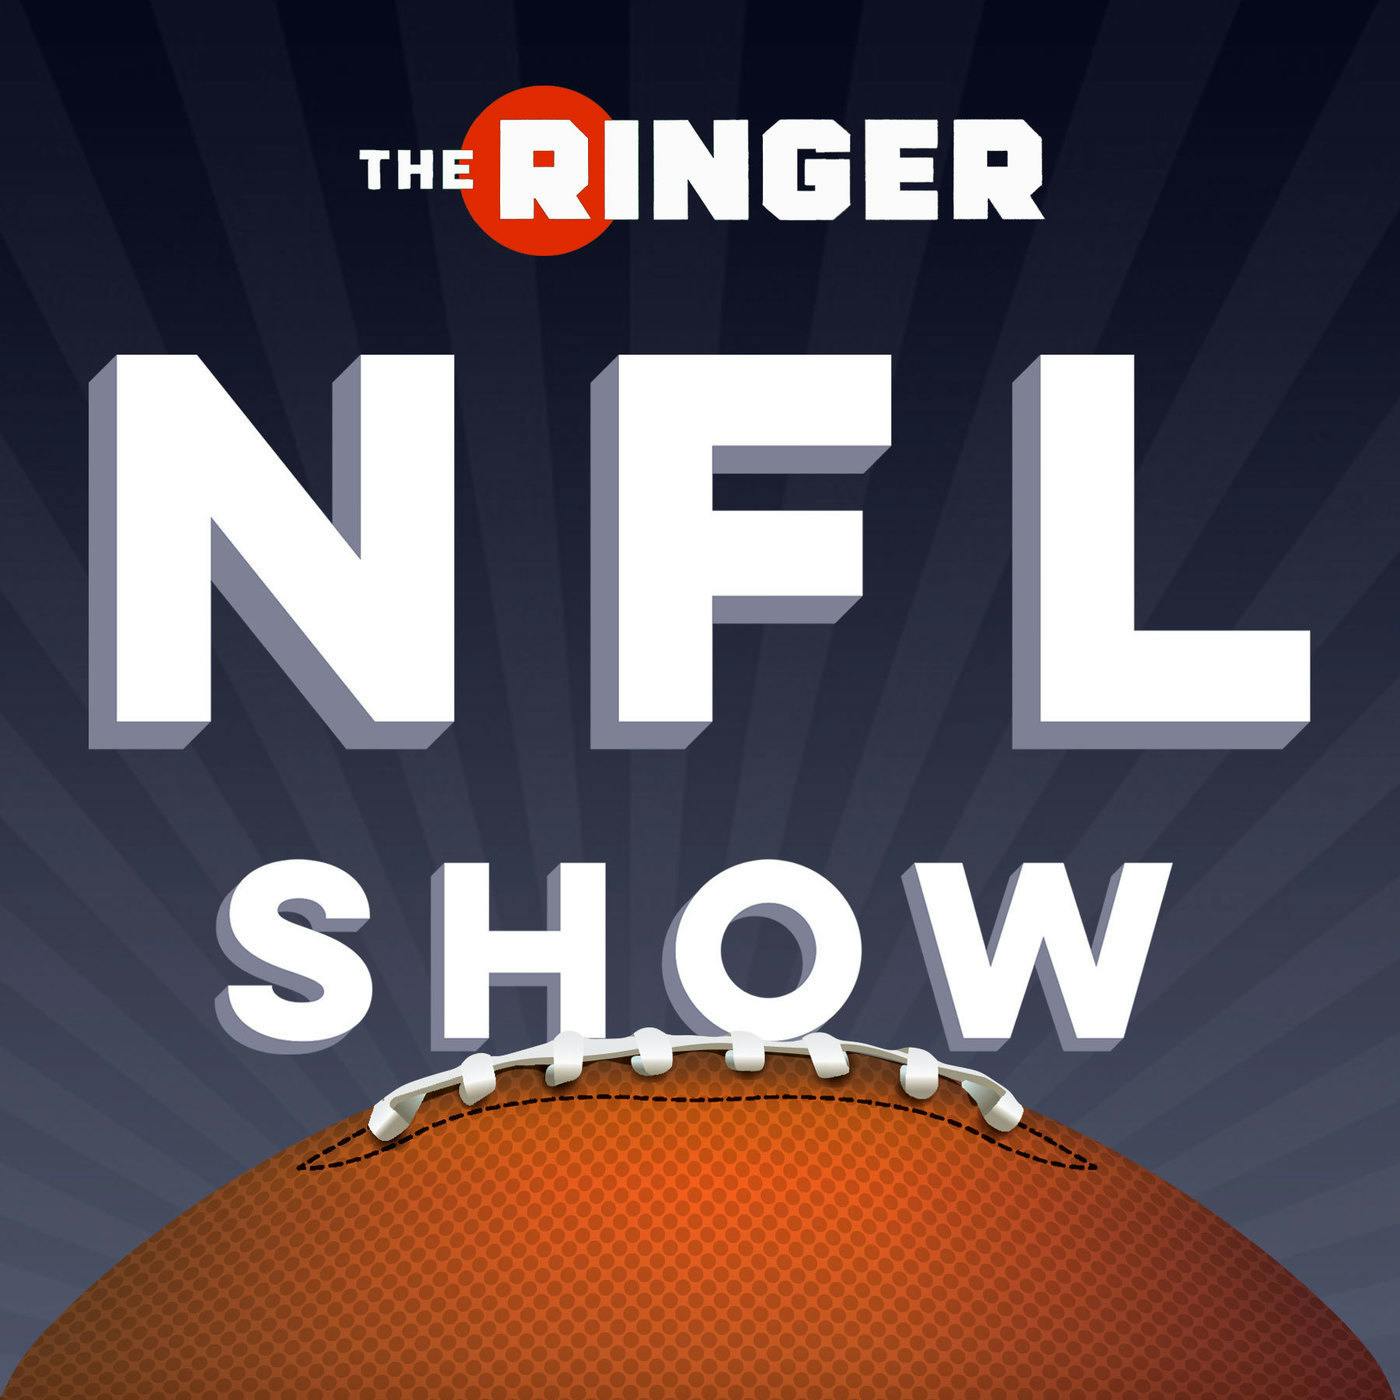 The Raiders Should Move to Las Vegas | The Ringer NFL Show (Ep. 364)